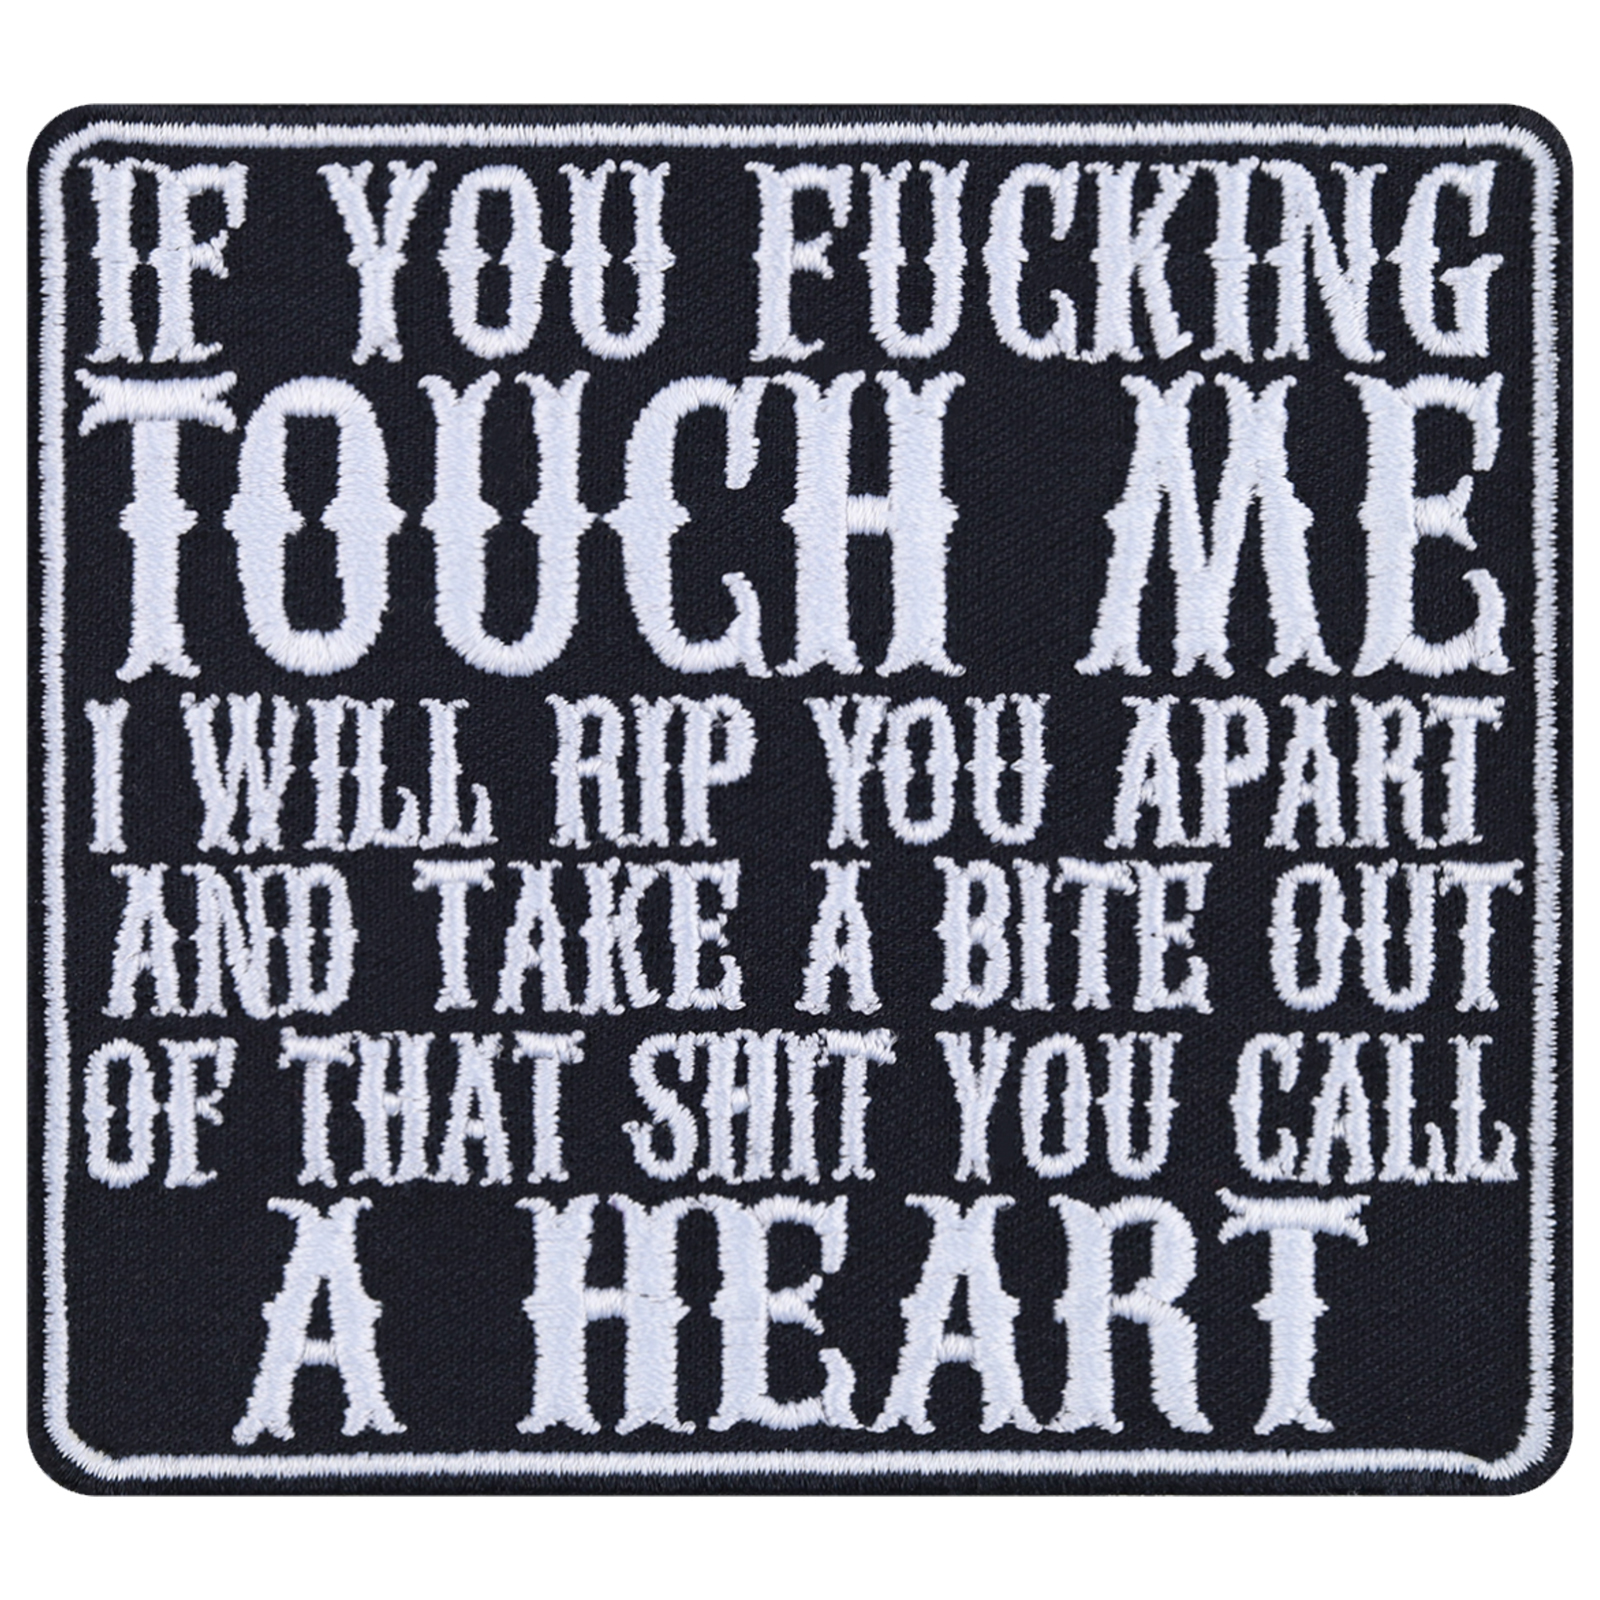 If you fucking touch me I will rip you apart and take a bite out of that shit you call a heart - Patch